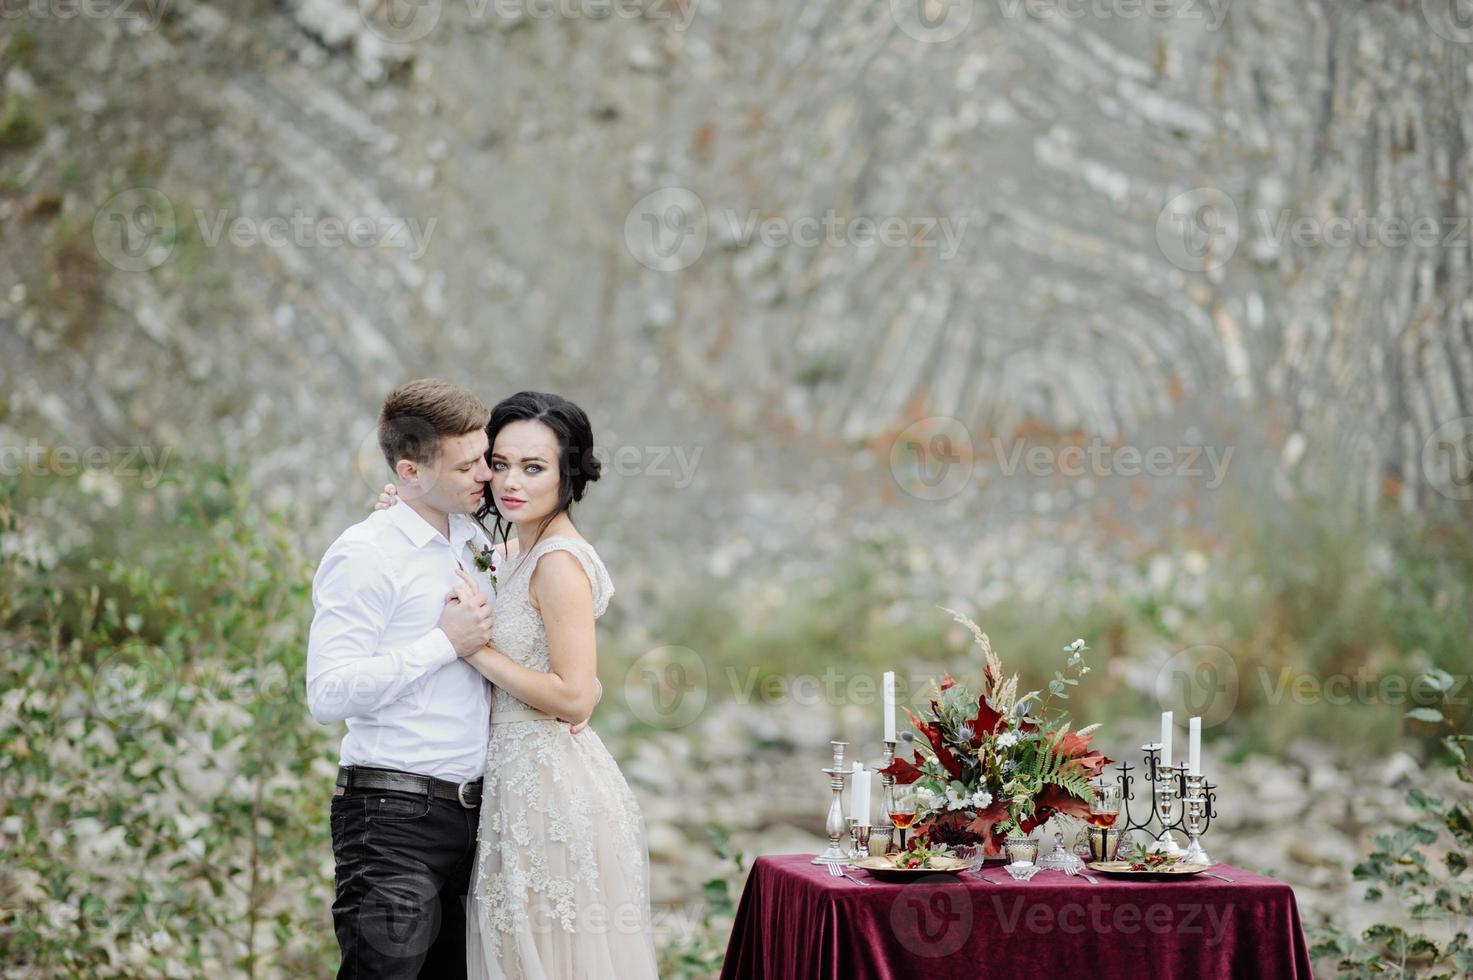 the bride and groom. wedding ceremony on the background of the mountains photo